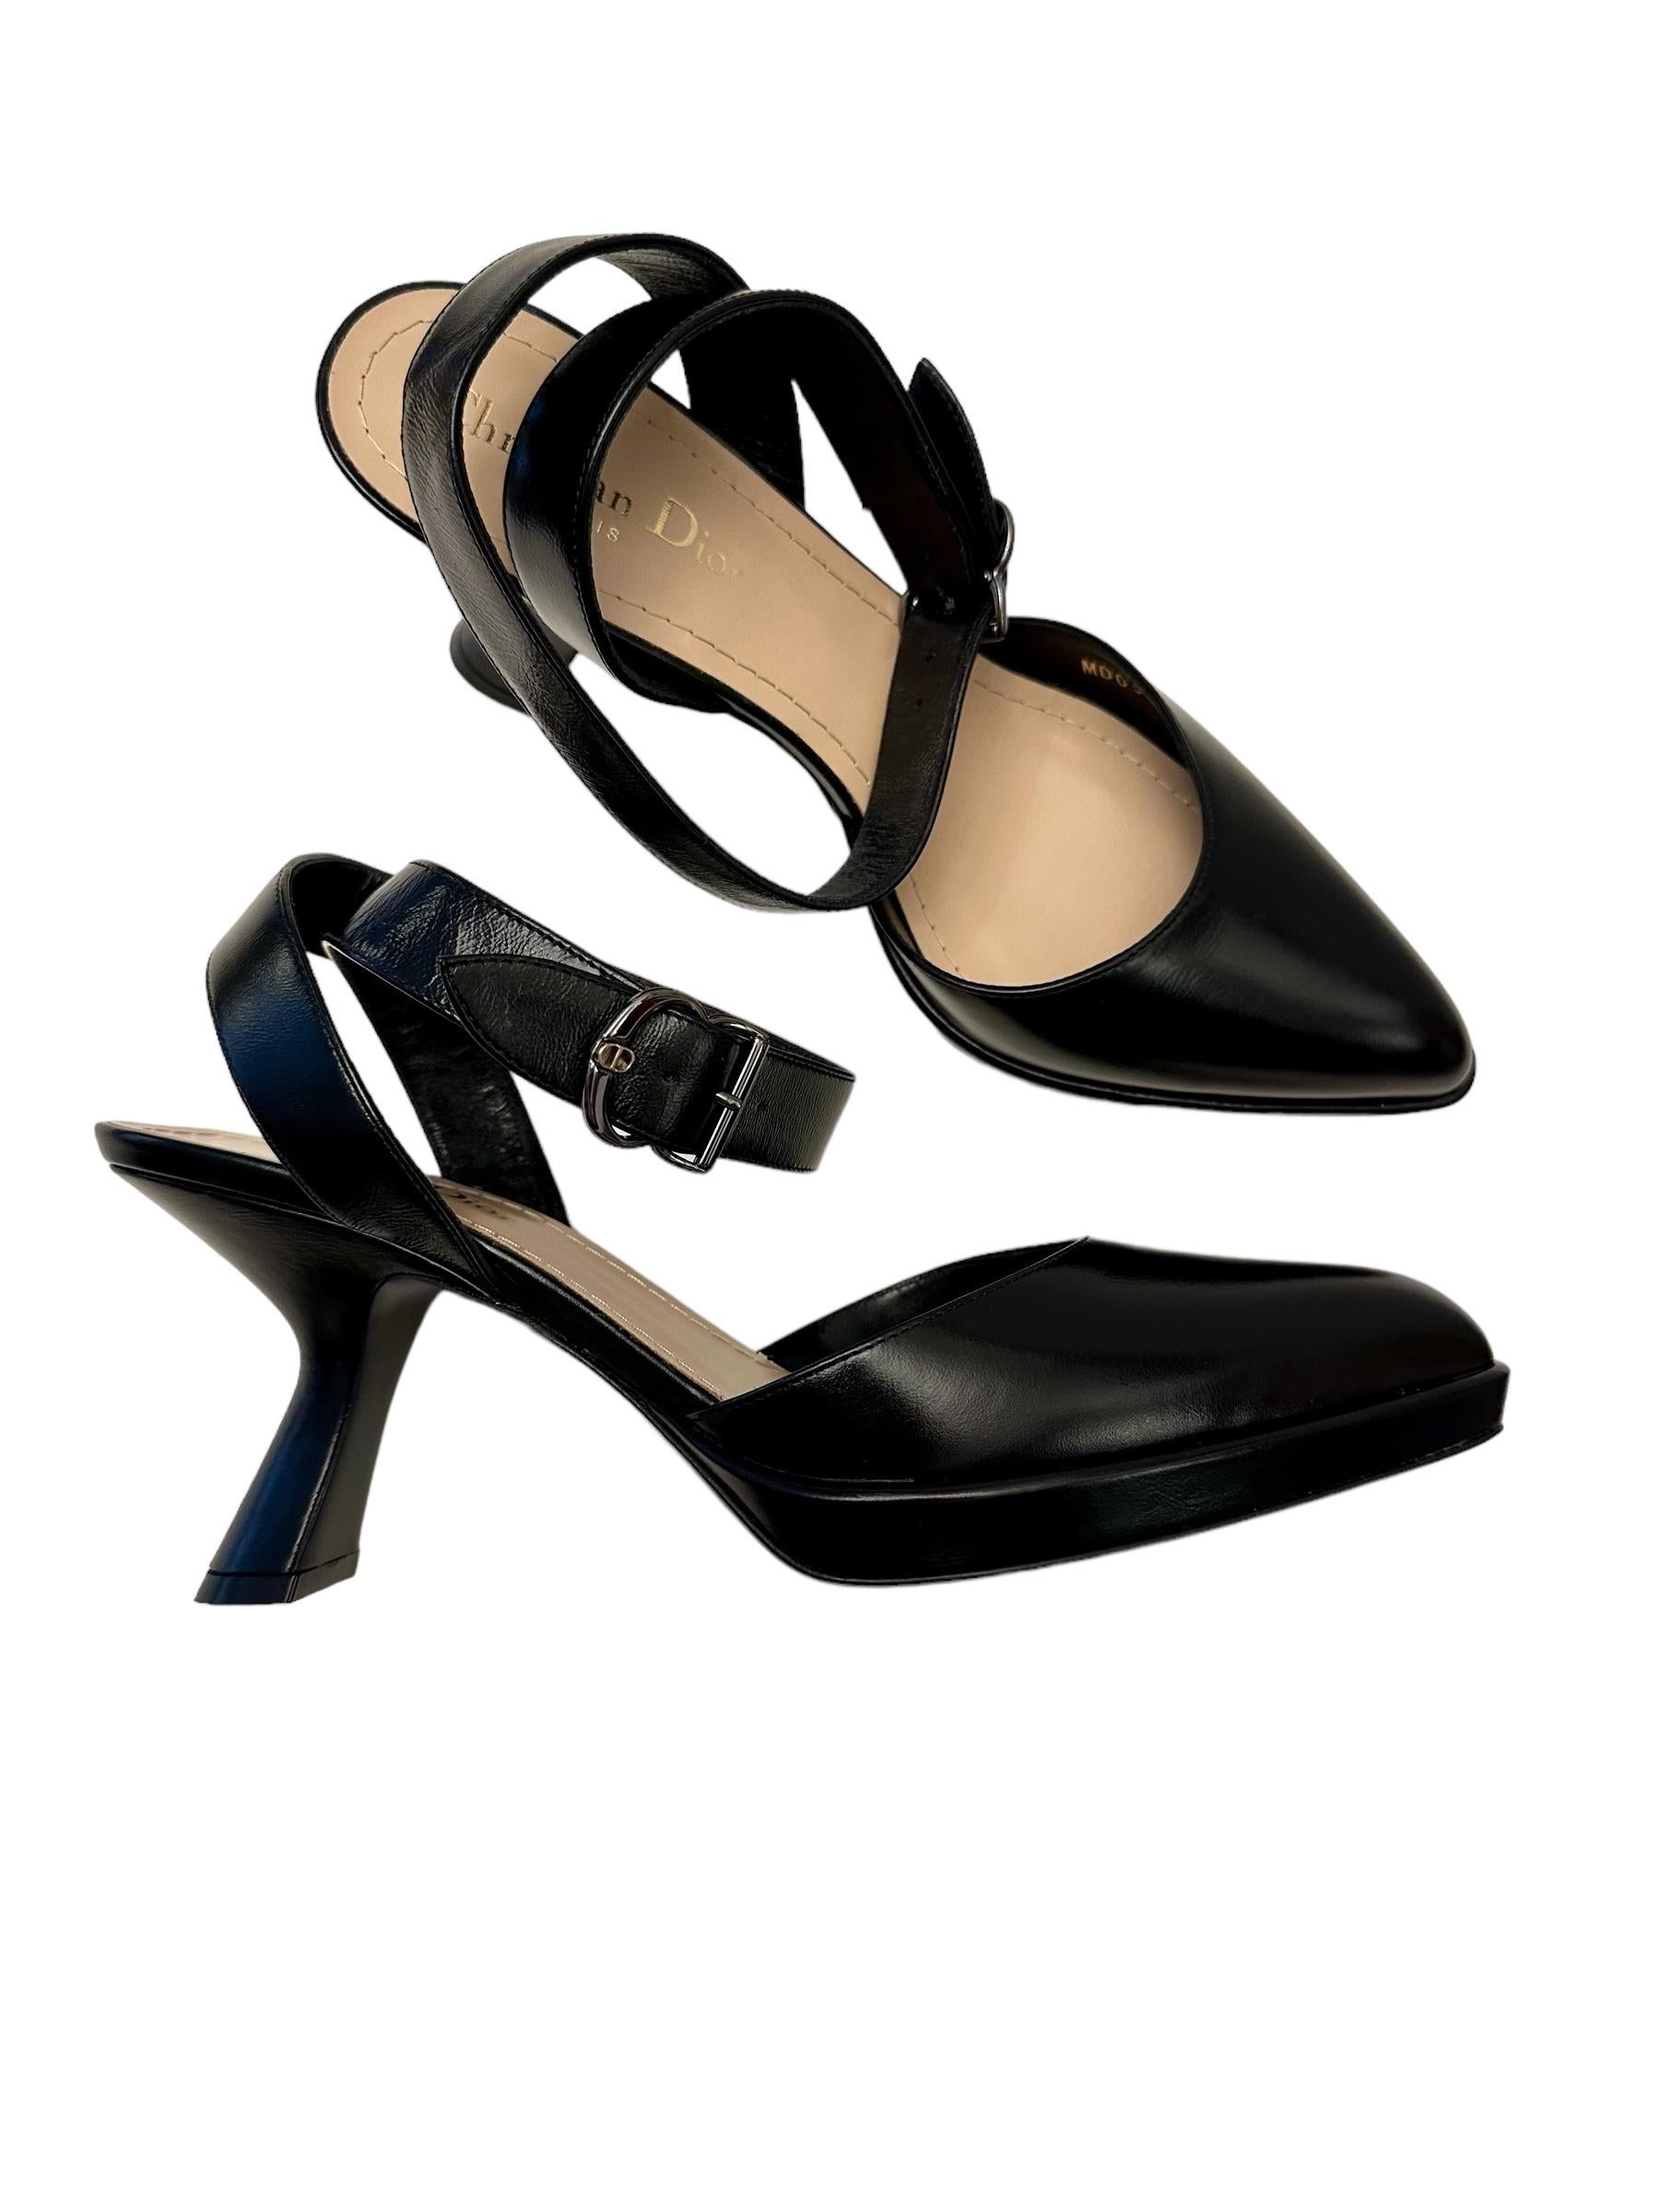 Christian Dior New Black Leather Soul Pumps  In Excellent Condition For Sale In Geneva, CH